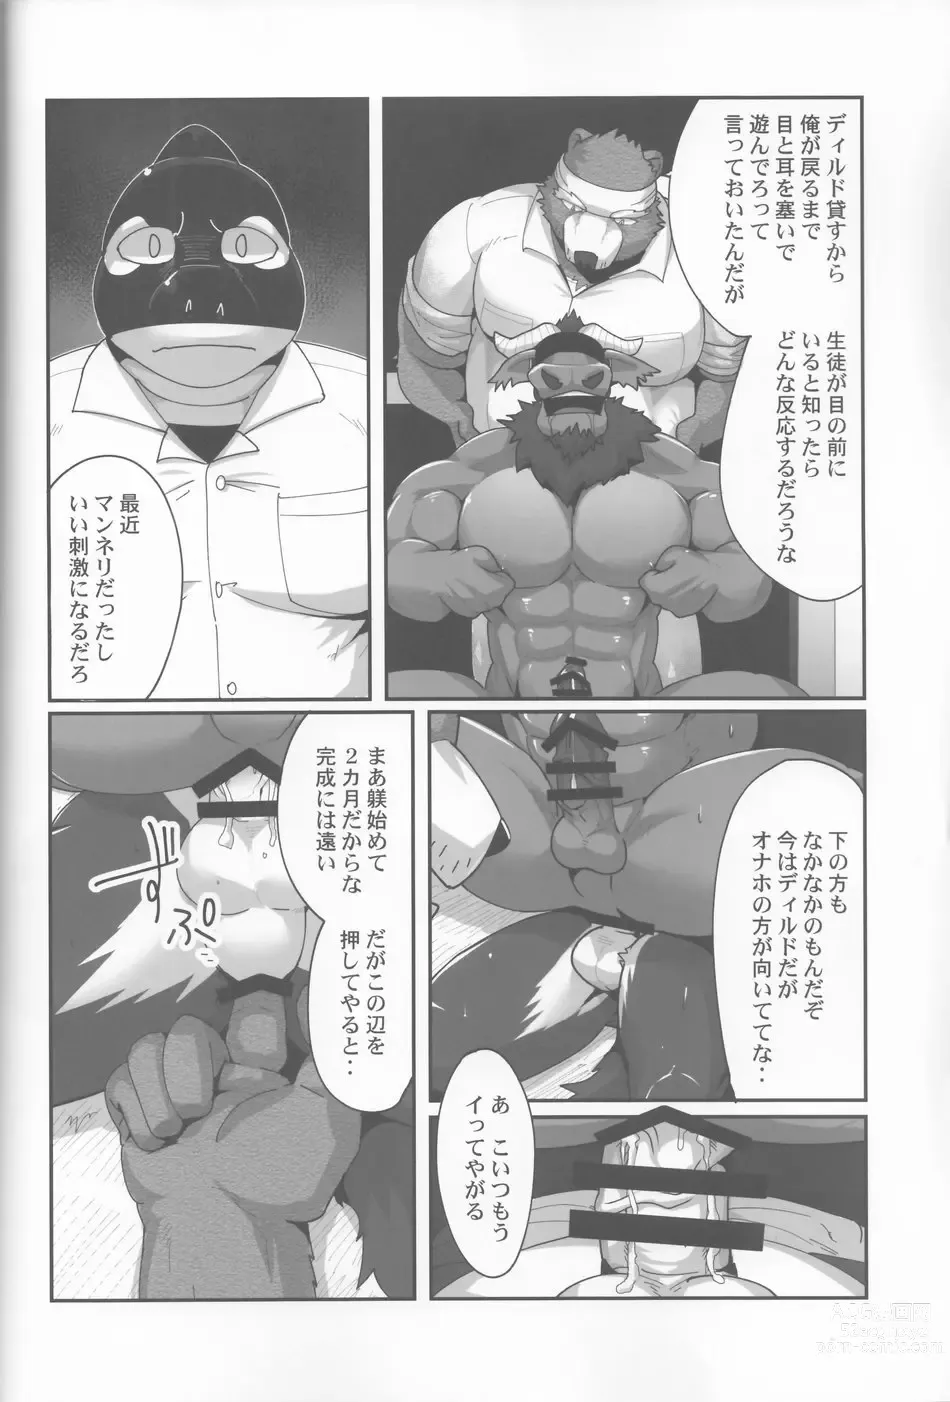 Page 45 of doujinshi The Janitor raises Cock slaves in the Staff Room